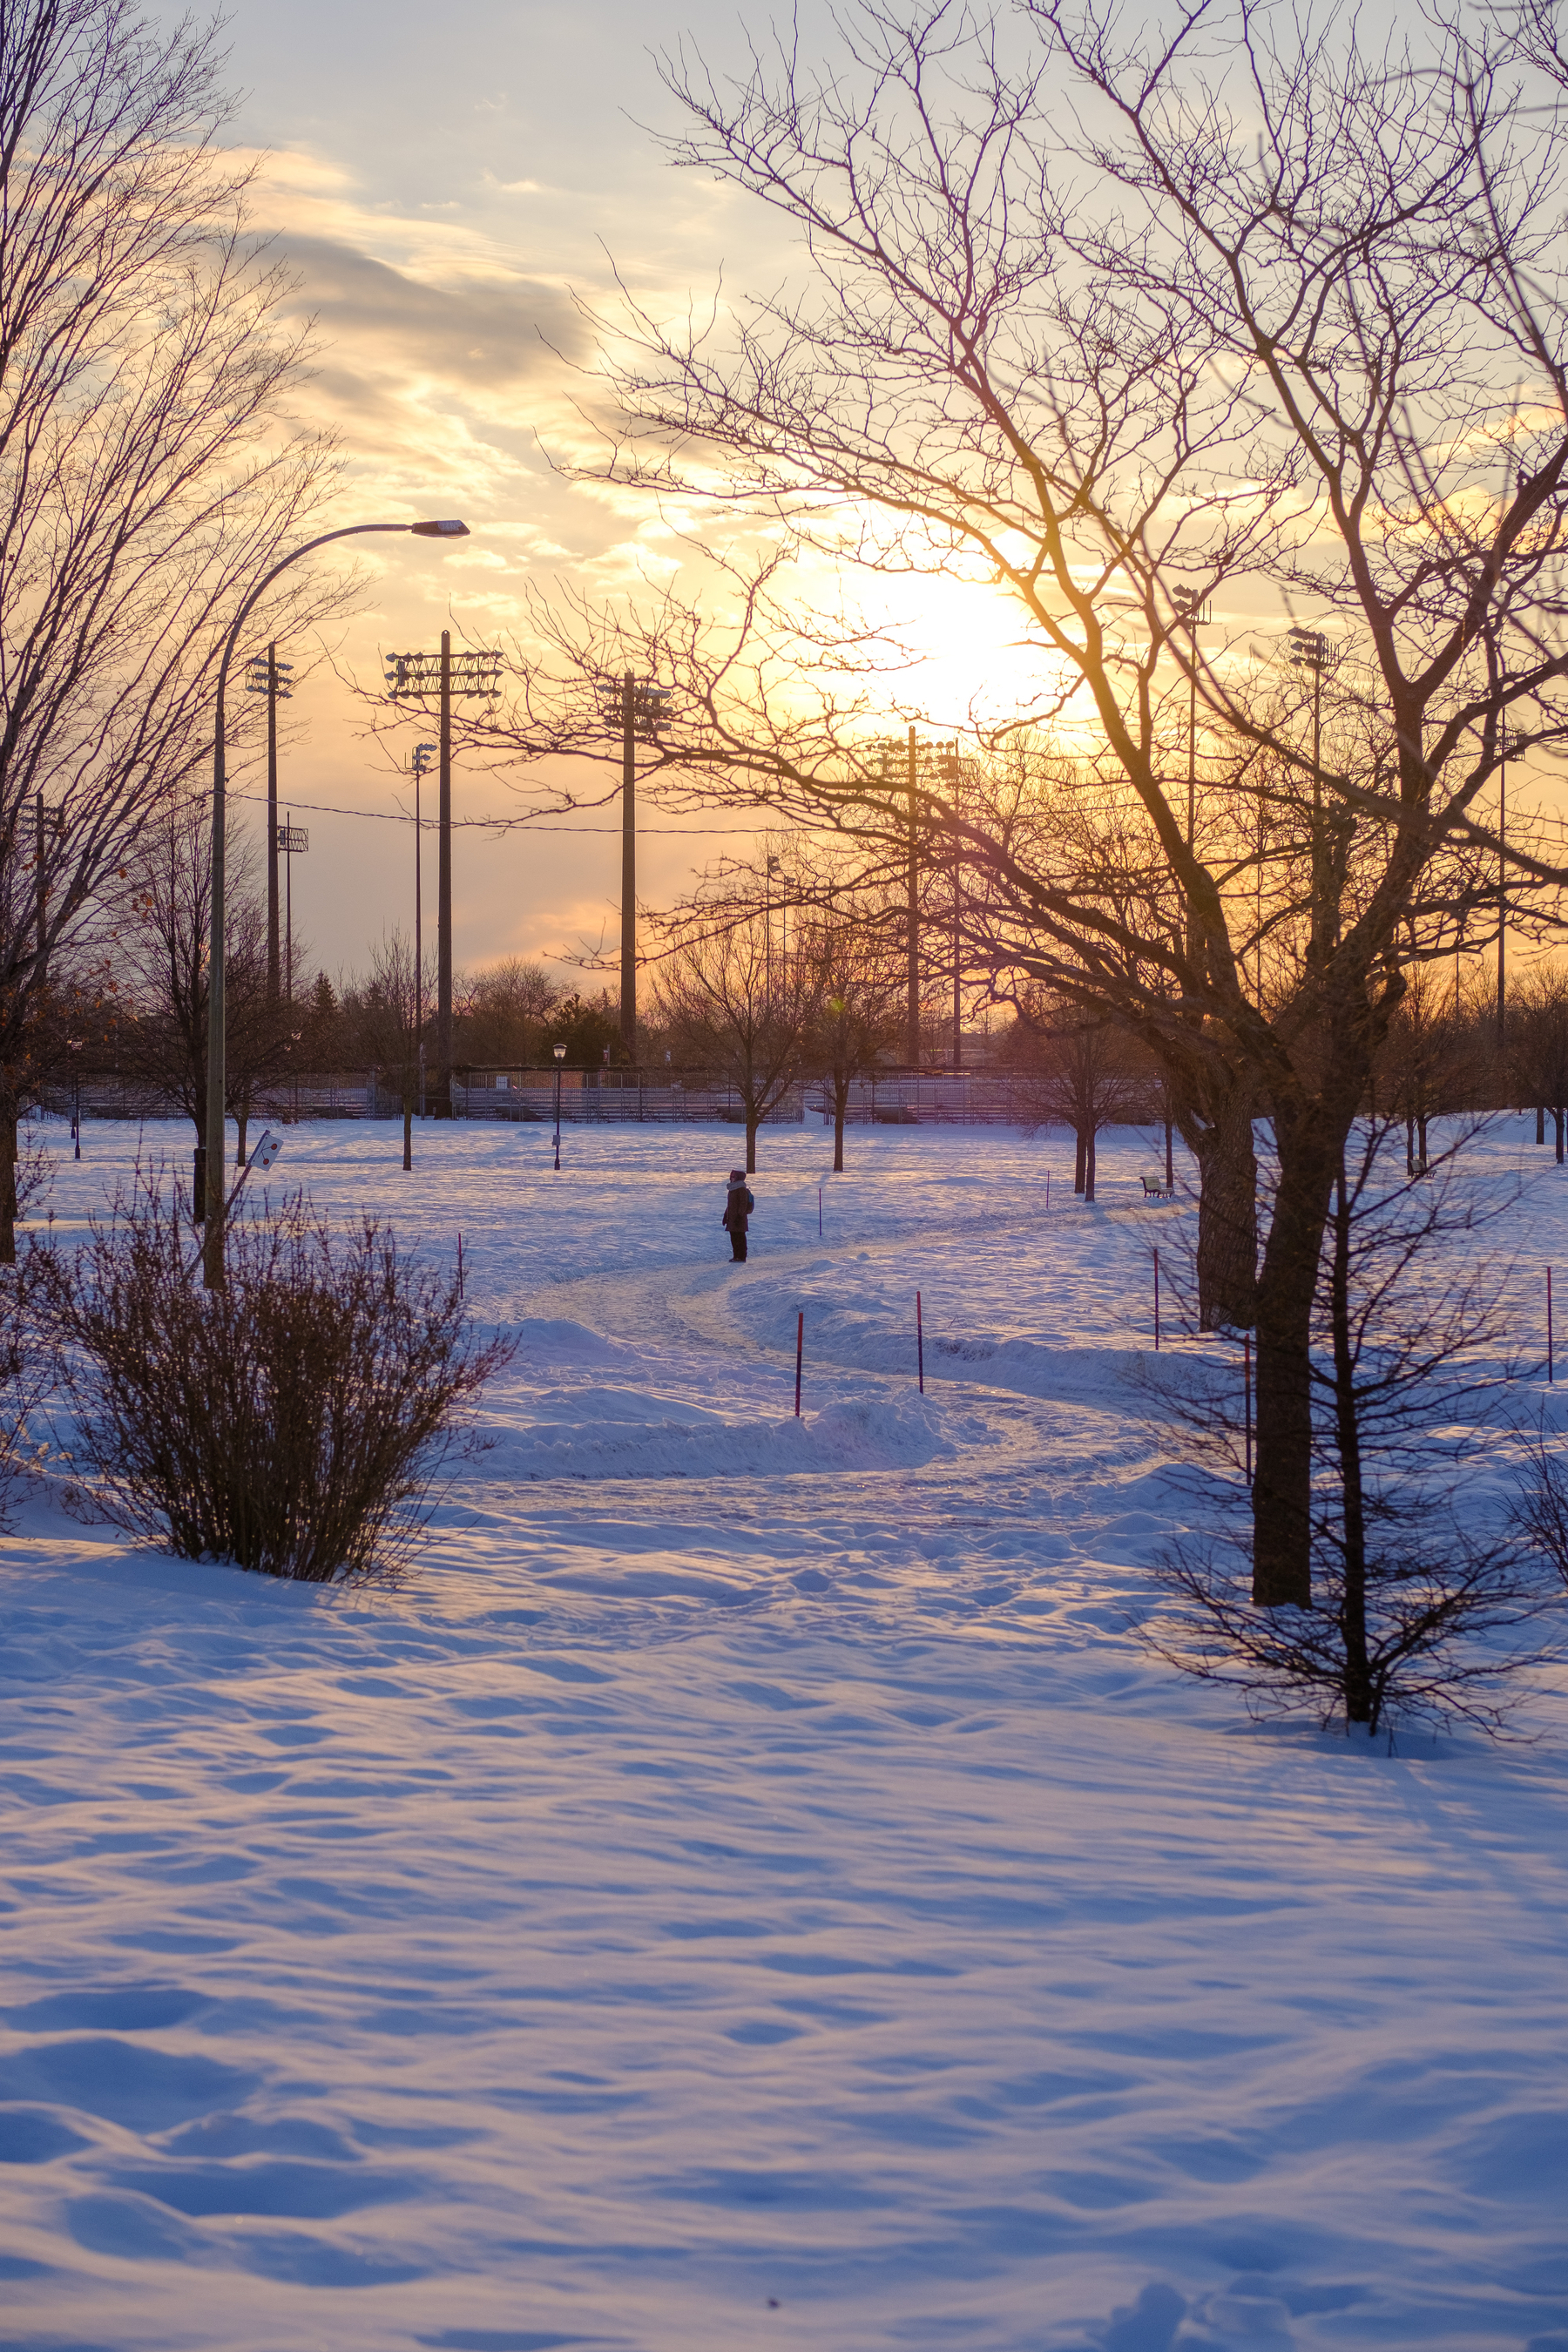 Parc Jarry is covered with snow. A person is walking along the path as the sun sets behind them. The snow is blueish. The sky is yellow.